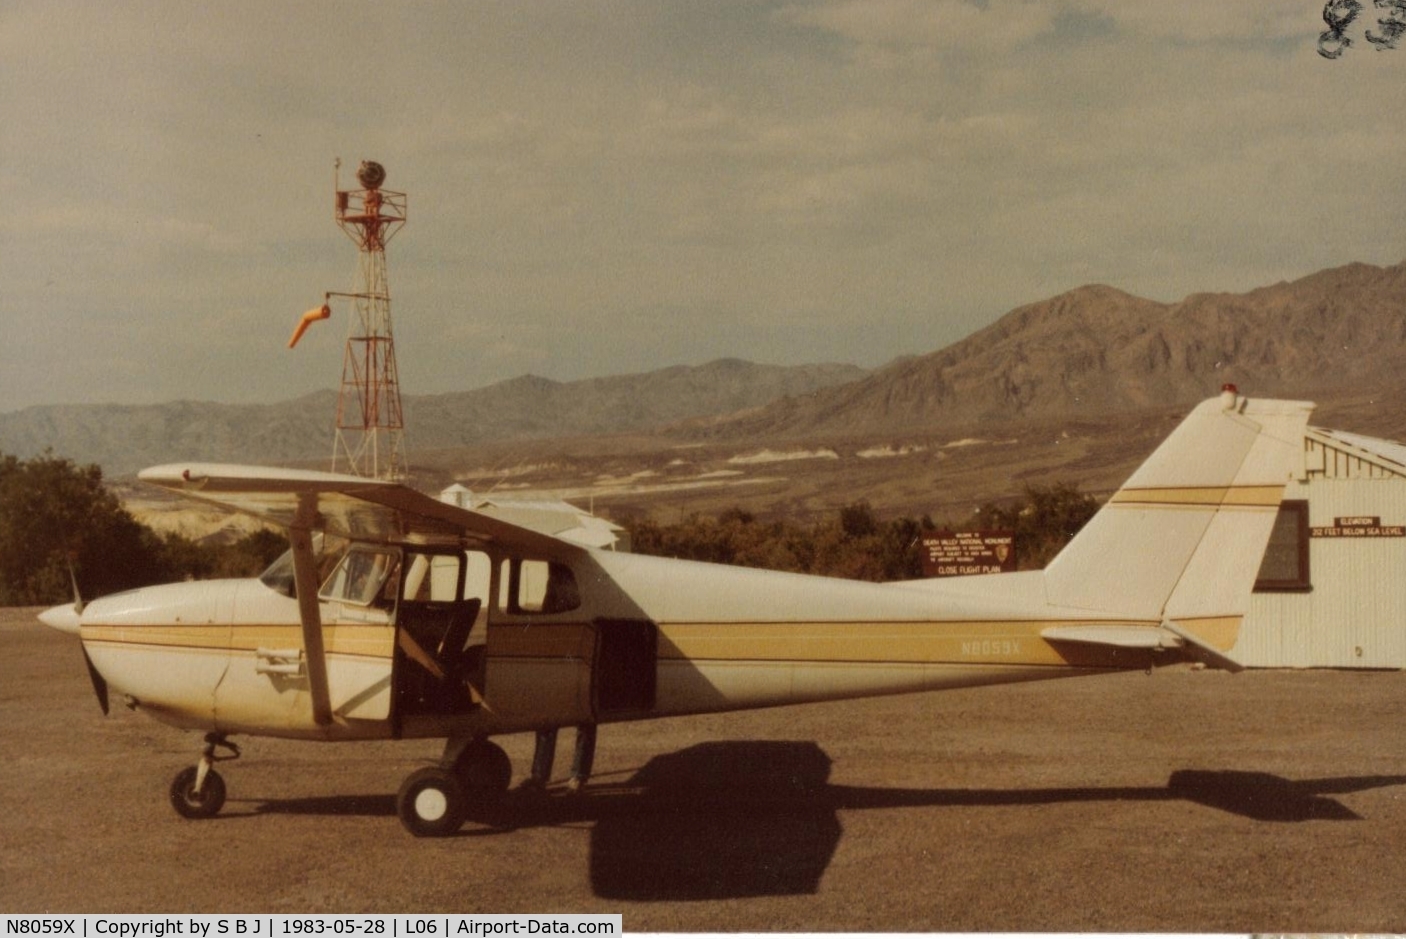 N8059X, 1961 Cessna 172B C/N 17248559, Short stop in Death Valley on the flight from Fremont,Ca. to Lake Havasu,Arizona on Memorial Day weekend in 1983. A very memorable (in my top 25) and satisfying day of flying!!Have found that great flights are not always determined by what you are flying.